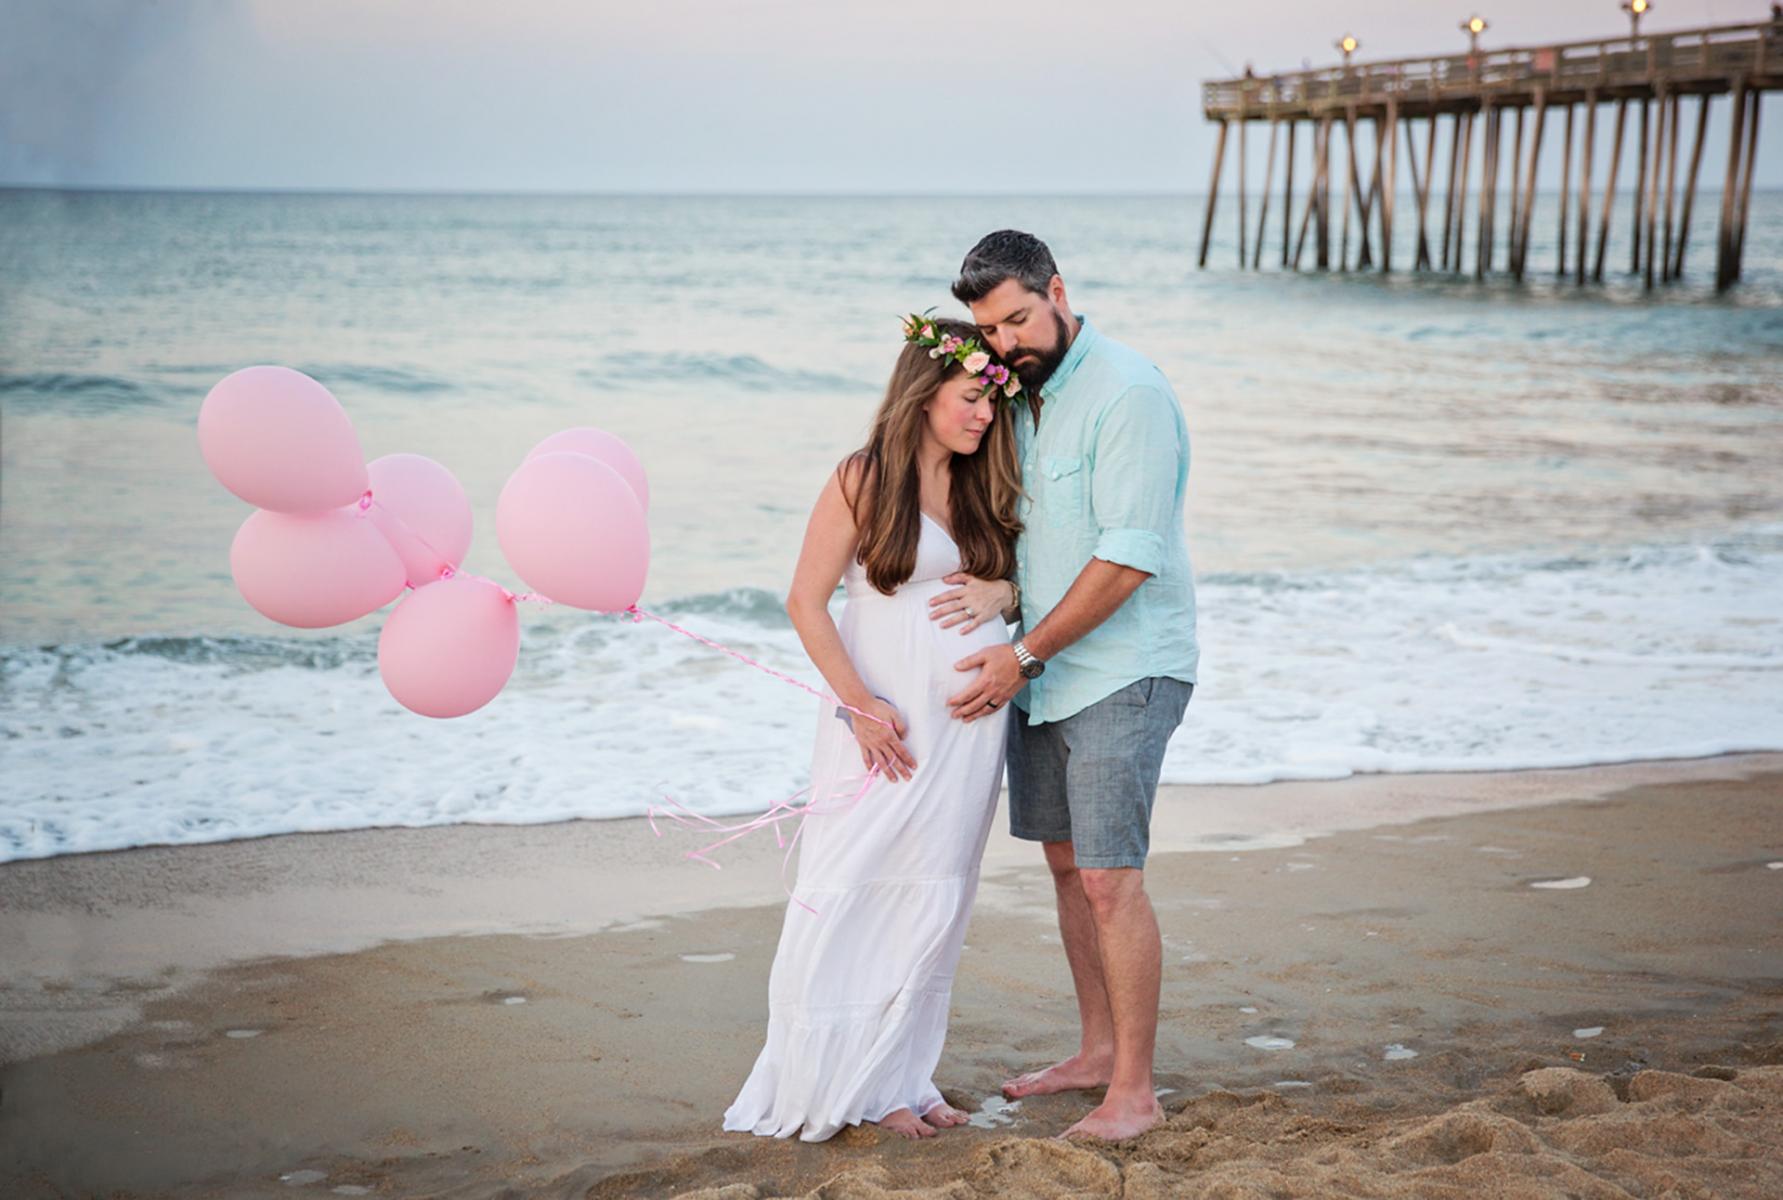 Kitty Hawk Pier NC Maternity Gender reveal with balloons